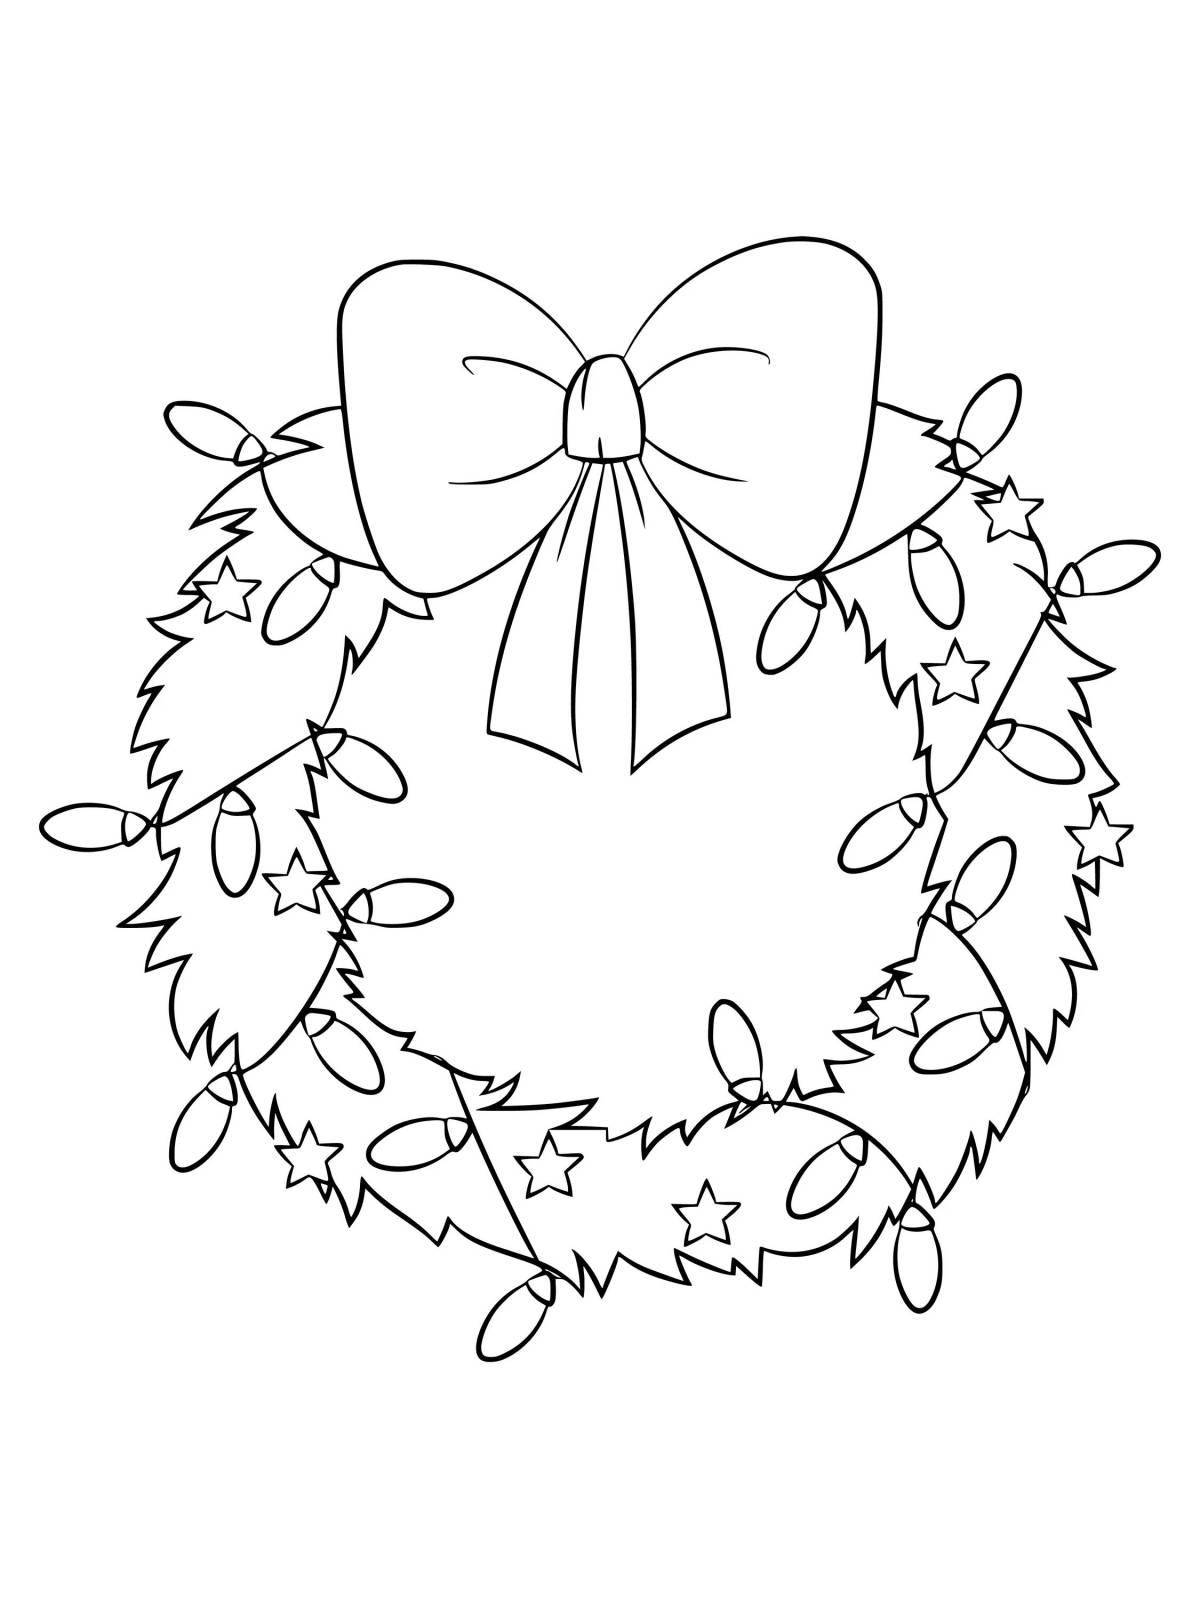 A fun Christmas wreath coloring book for kids